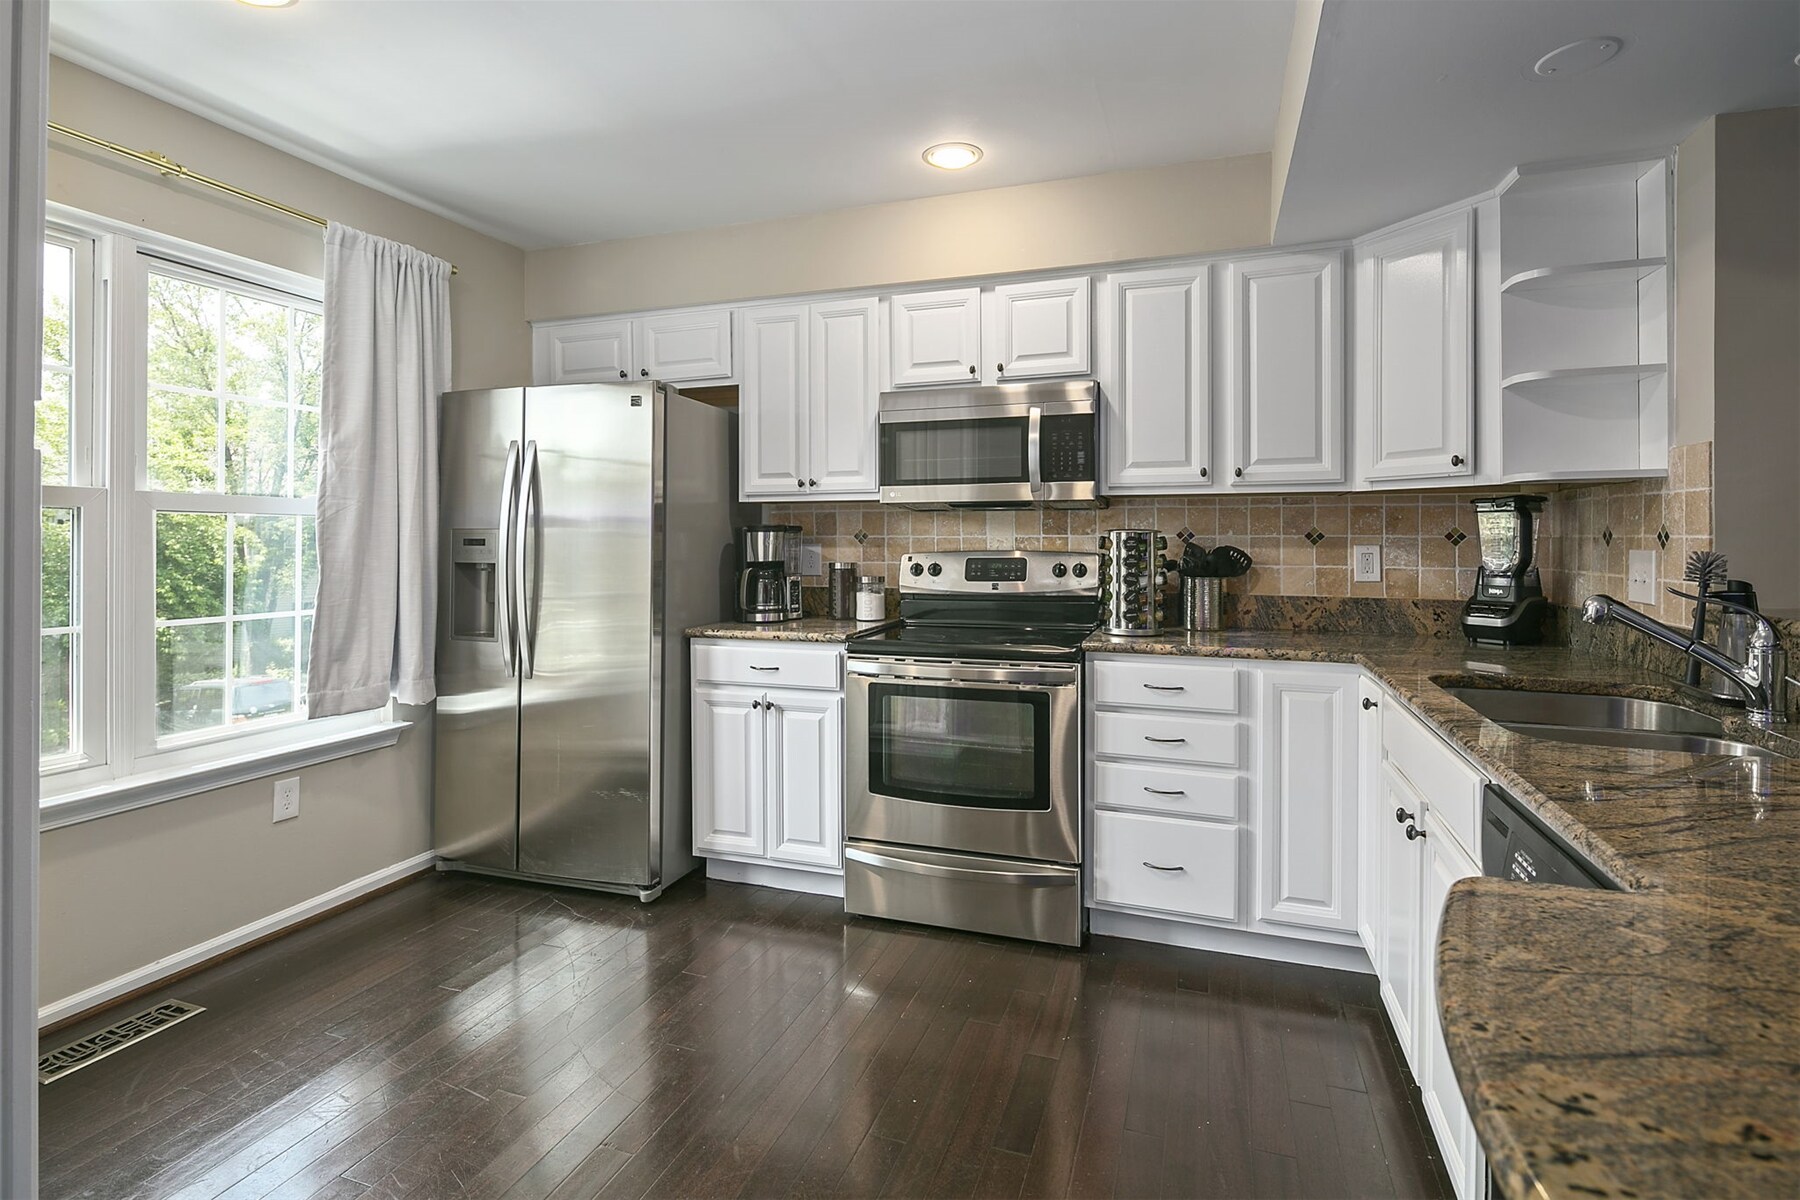 Spacious kitchen offers functionality with extra cooking room